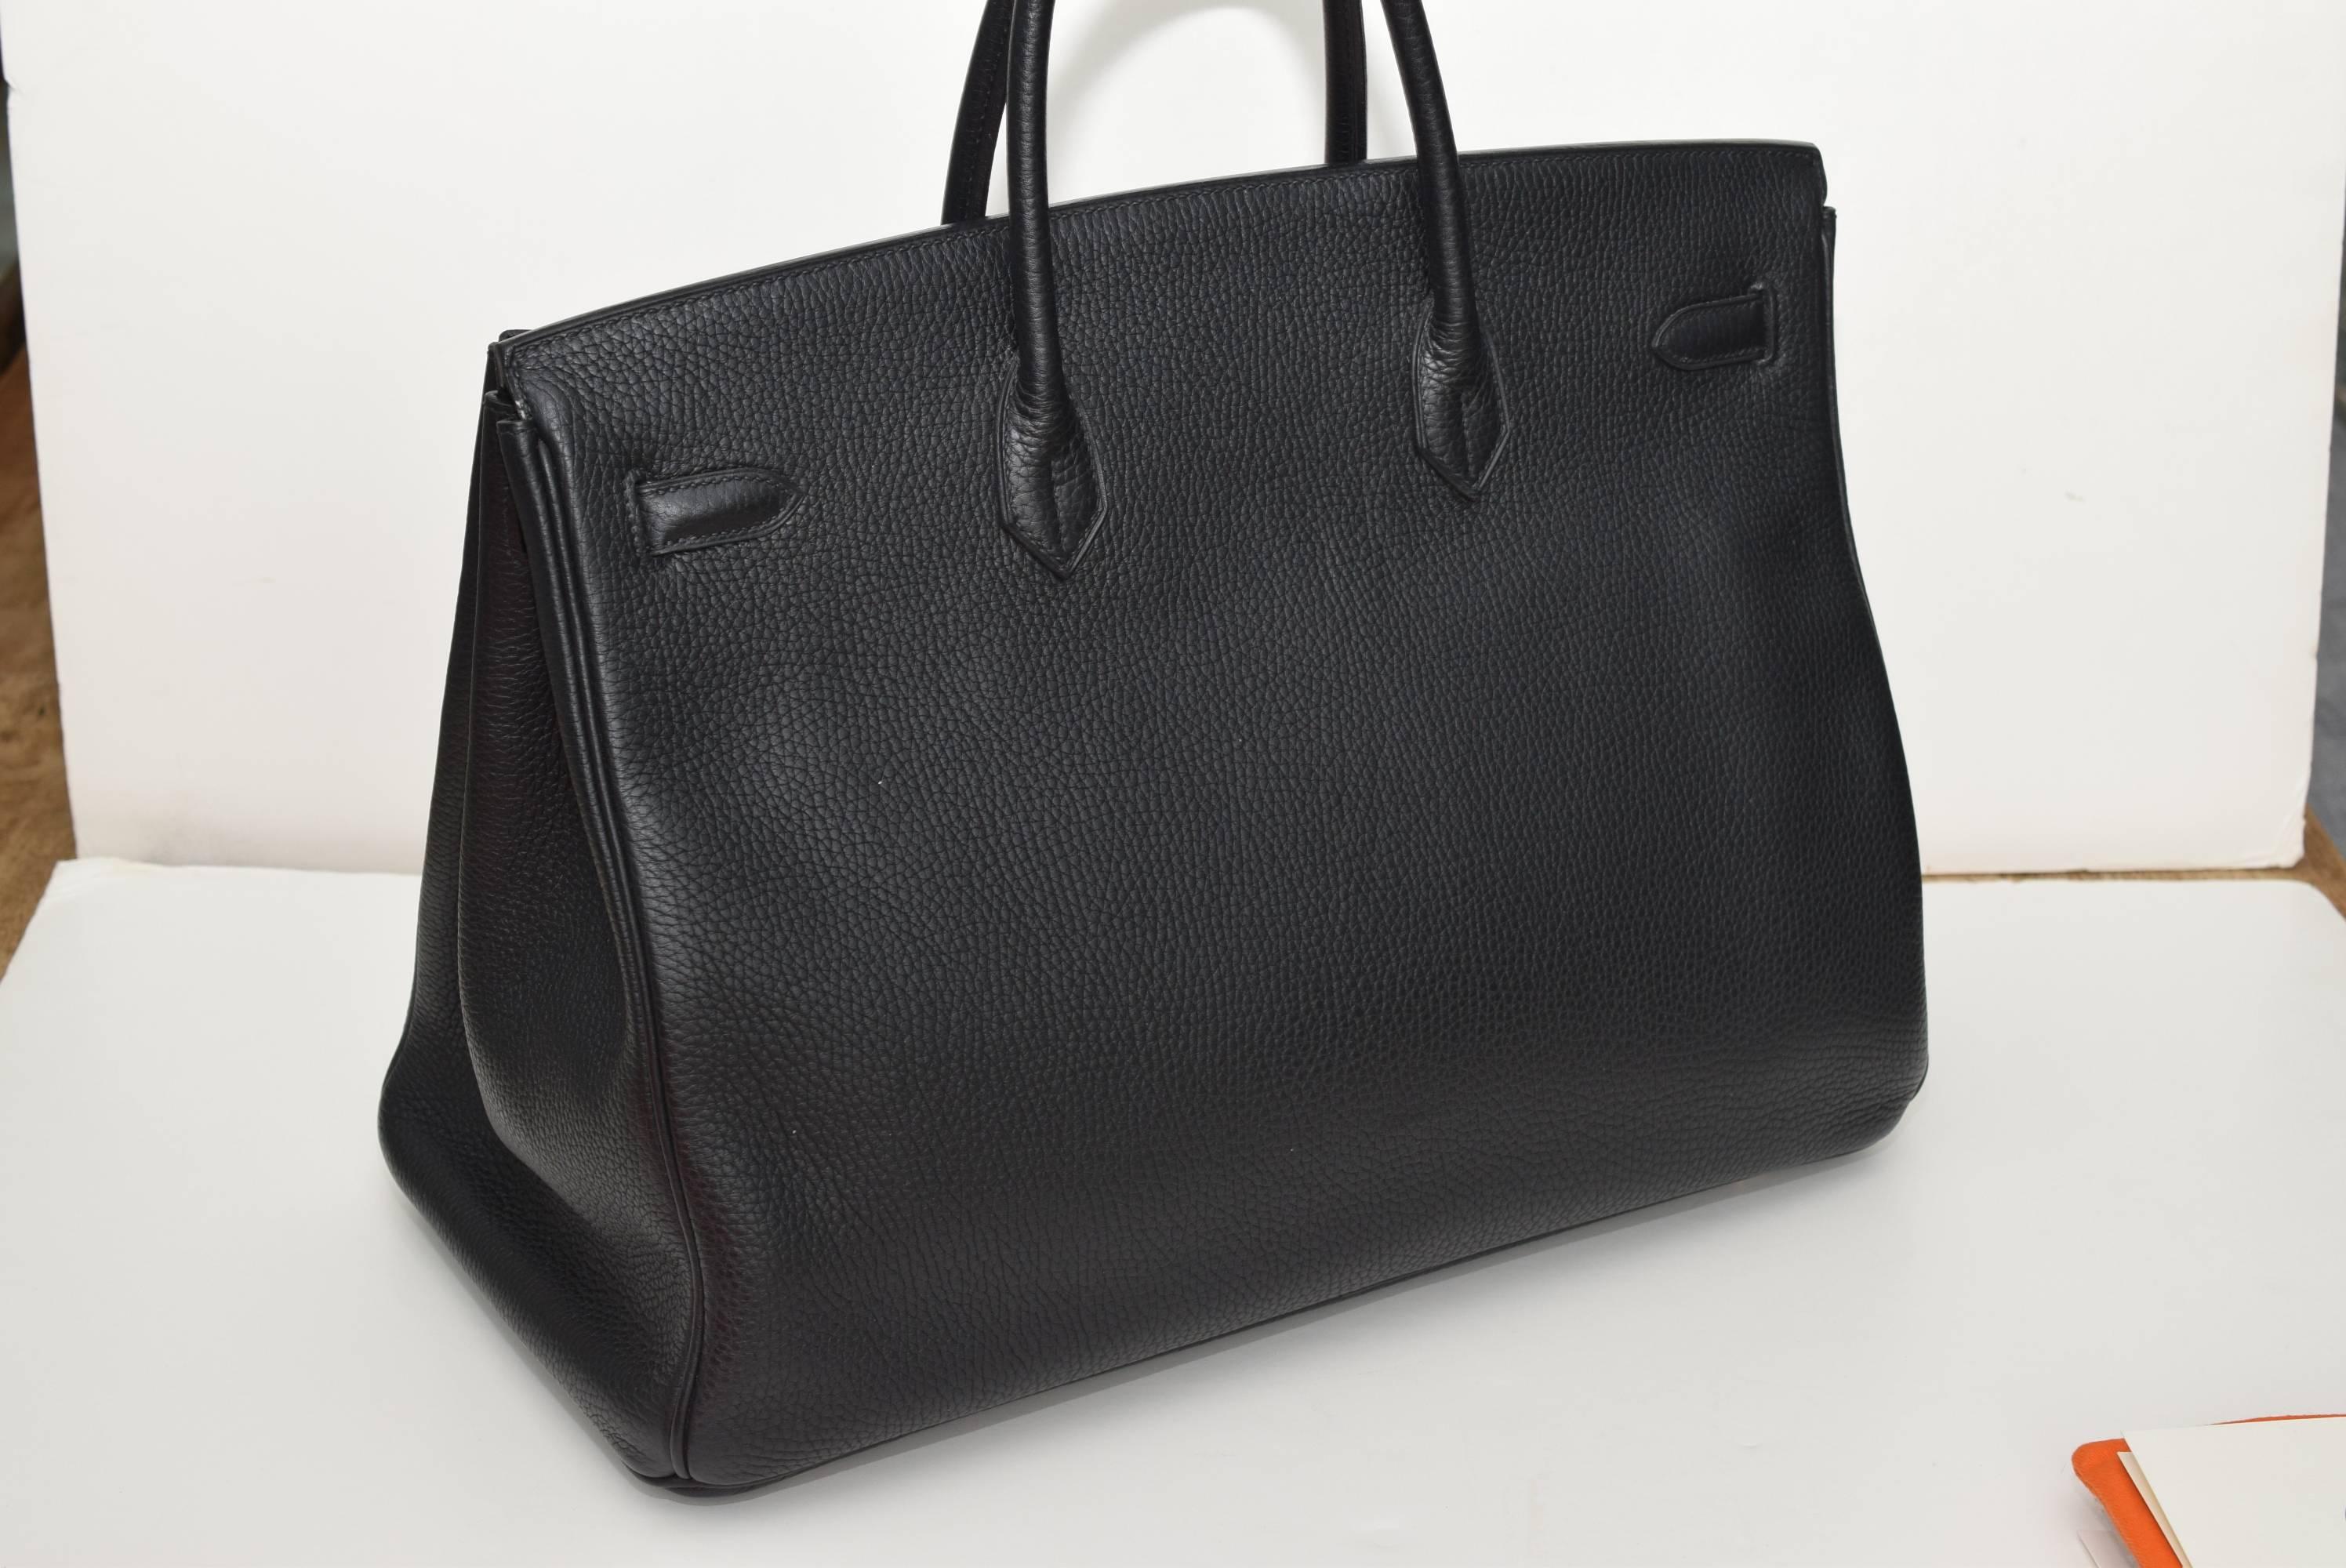 Hermes Birkin 40cm Togo Black Leather Bag In Excellent Condition For Sale In New York, NY